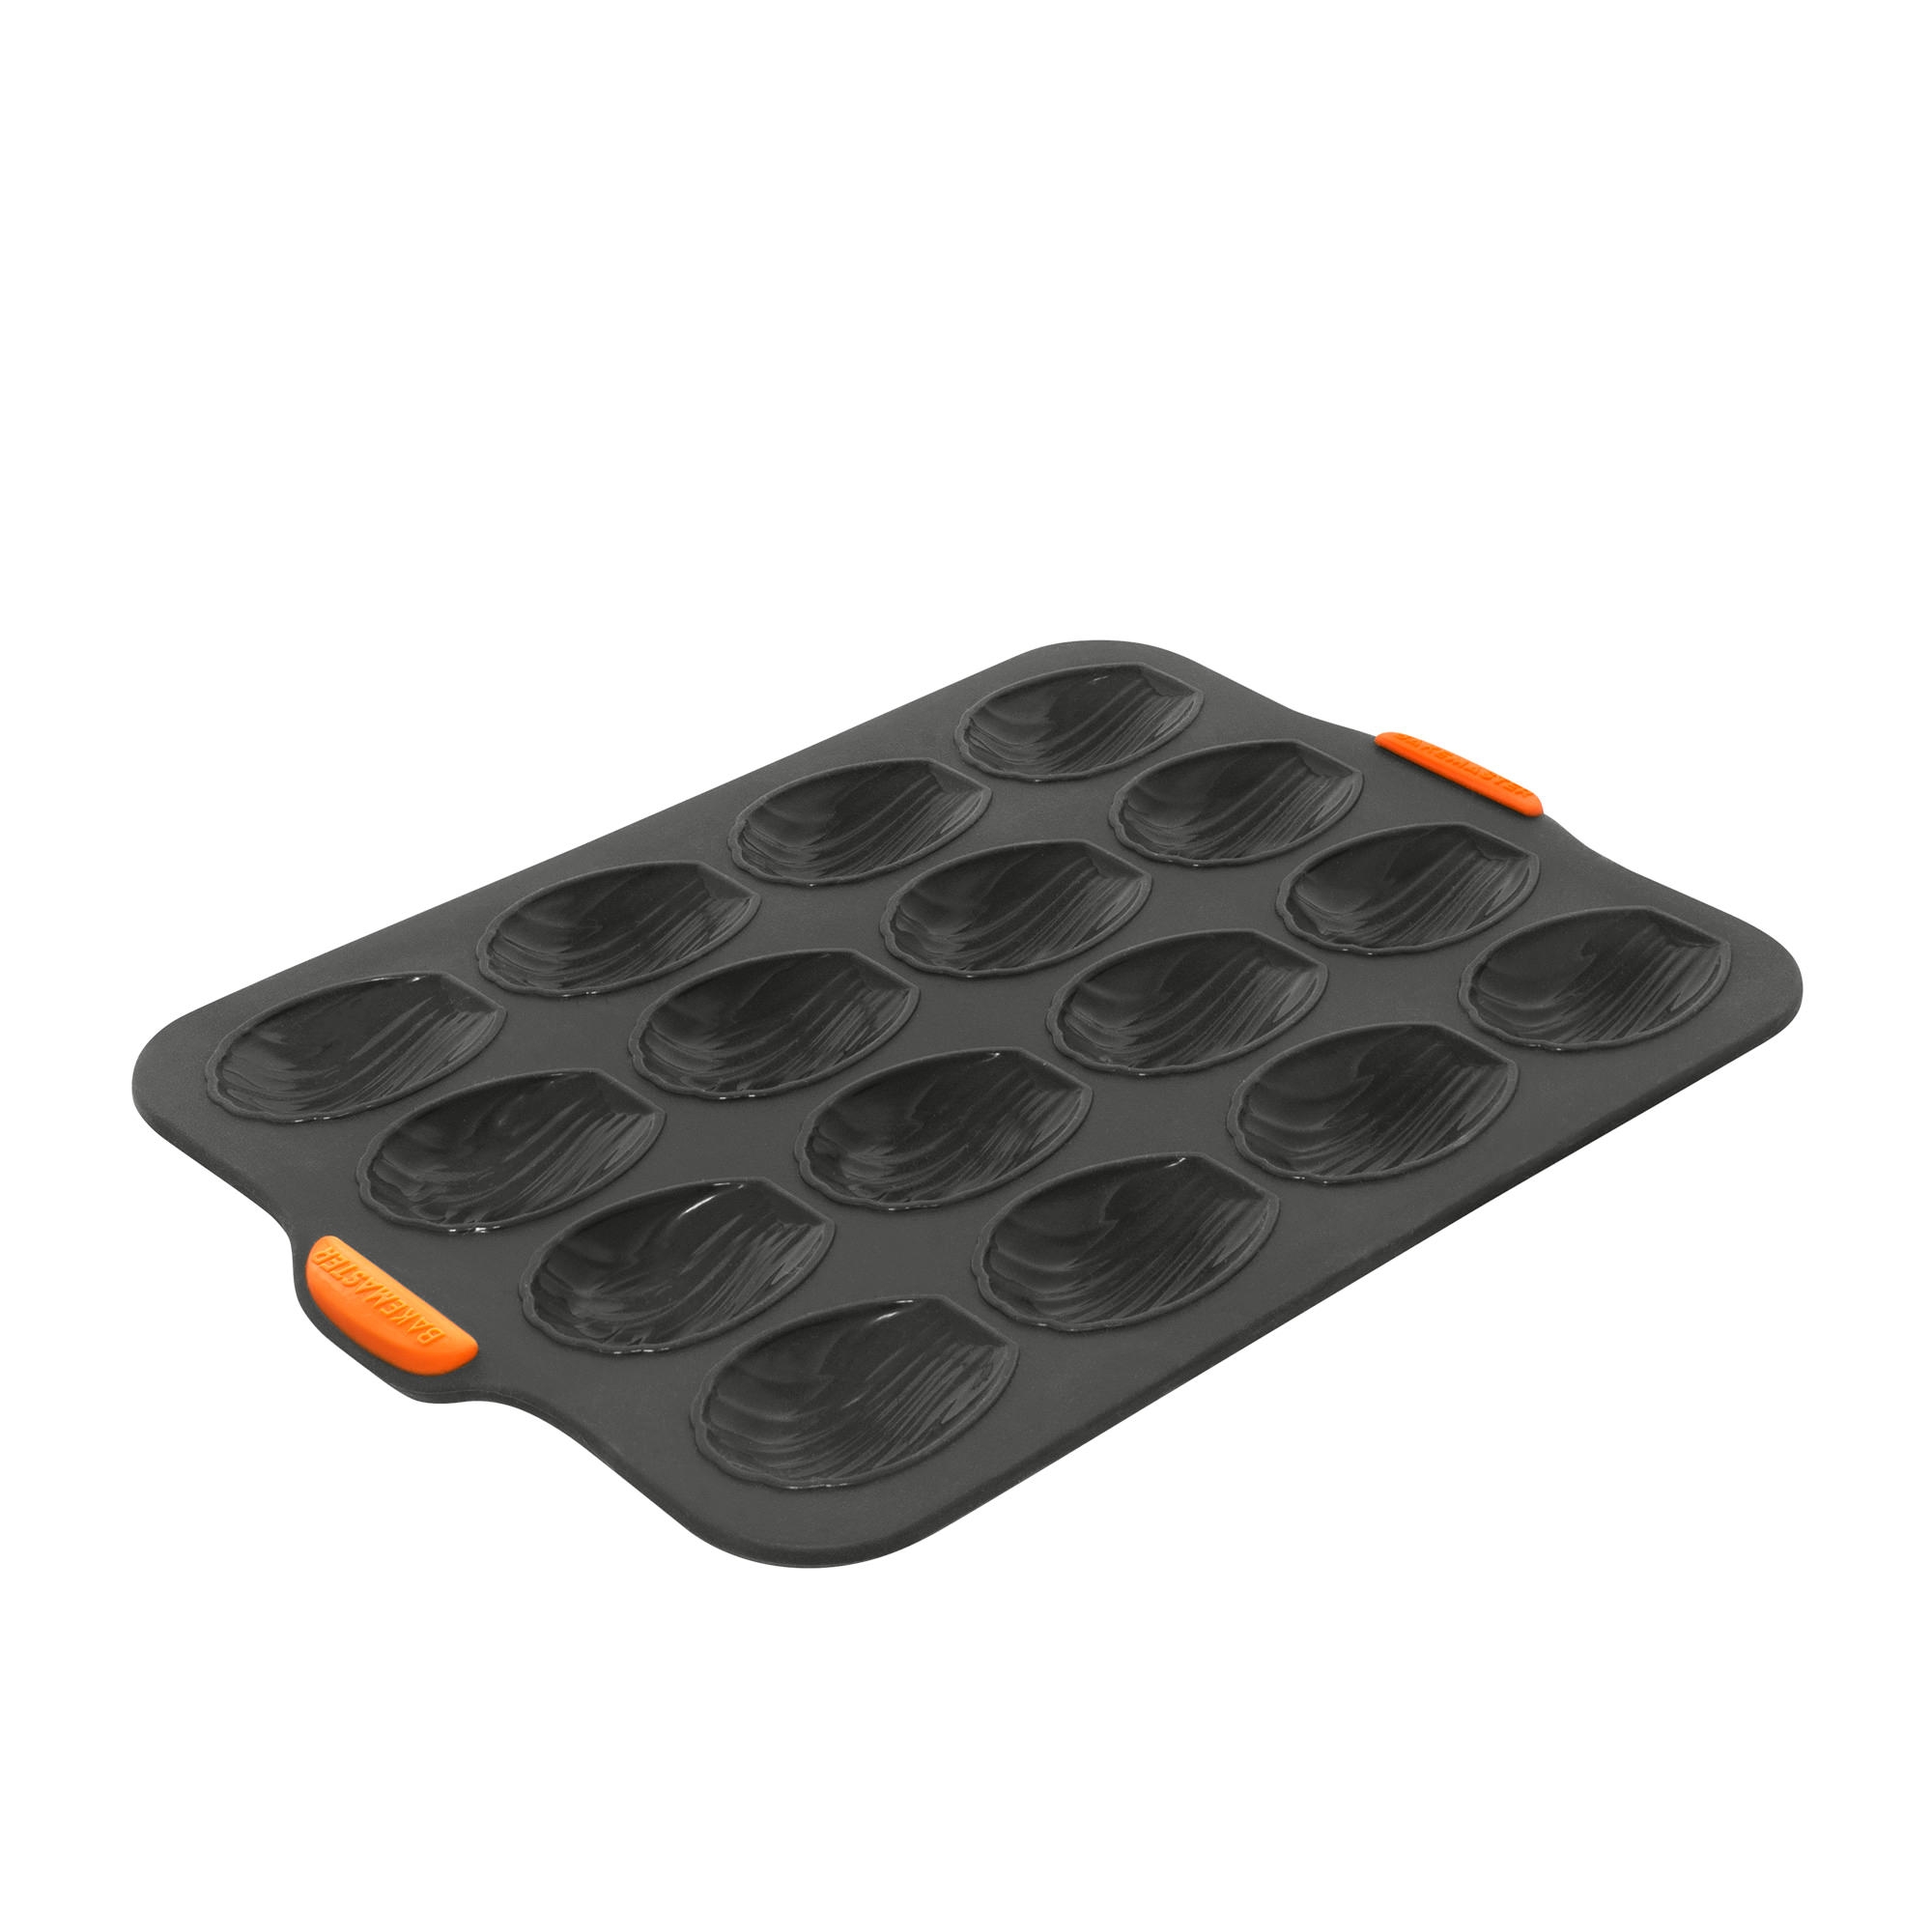 Bakemaster Silicone 16 Cup Madeleine Pan 35x24cm Image 1